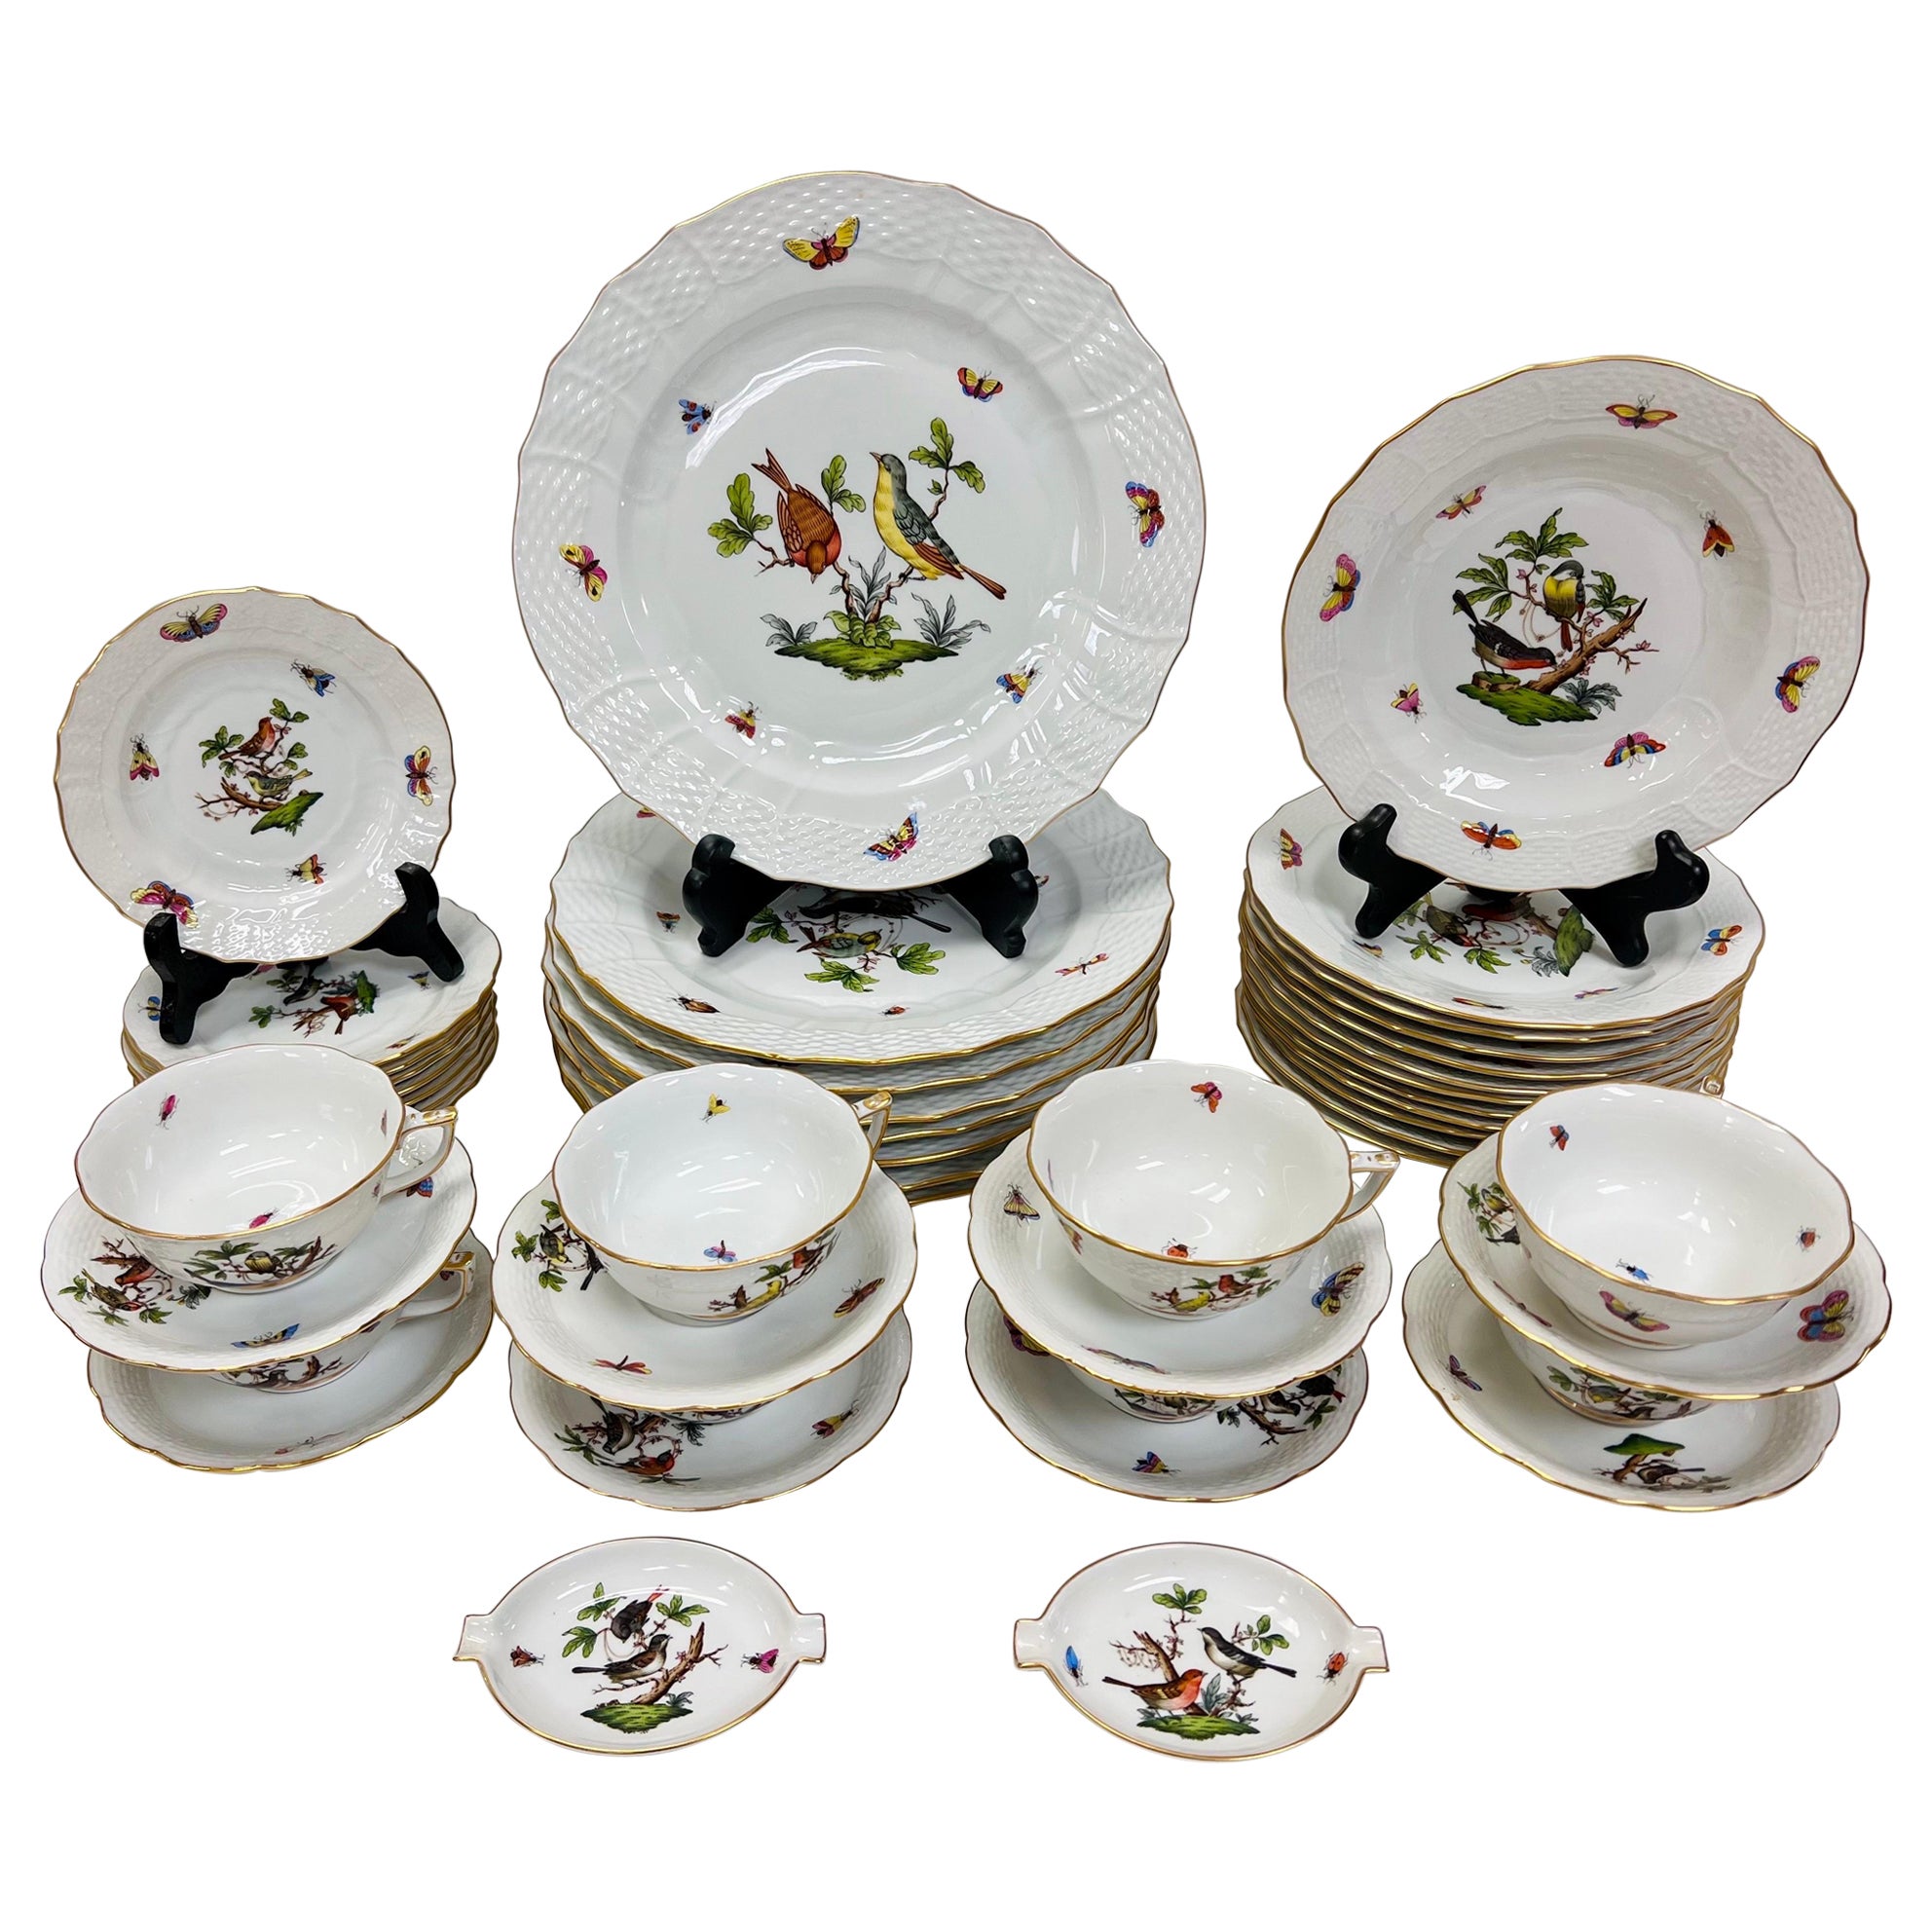 Herend Rothschild Pattern Porcelain China Mint 47 Pieces Service for 8 +++